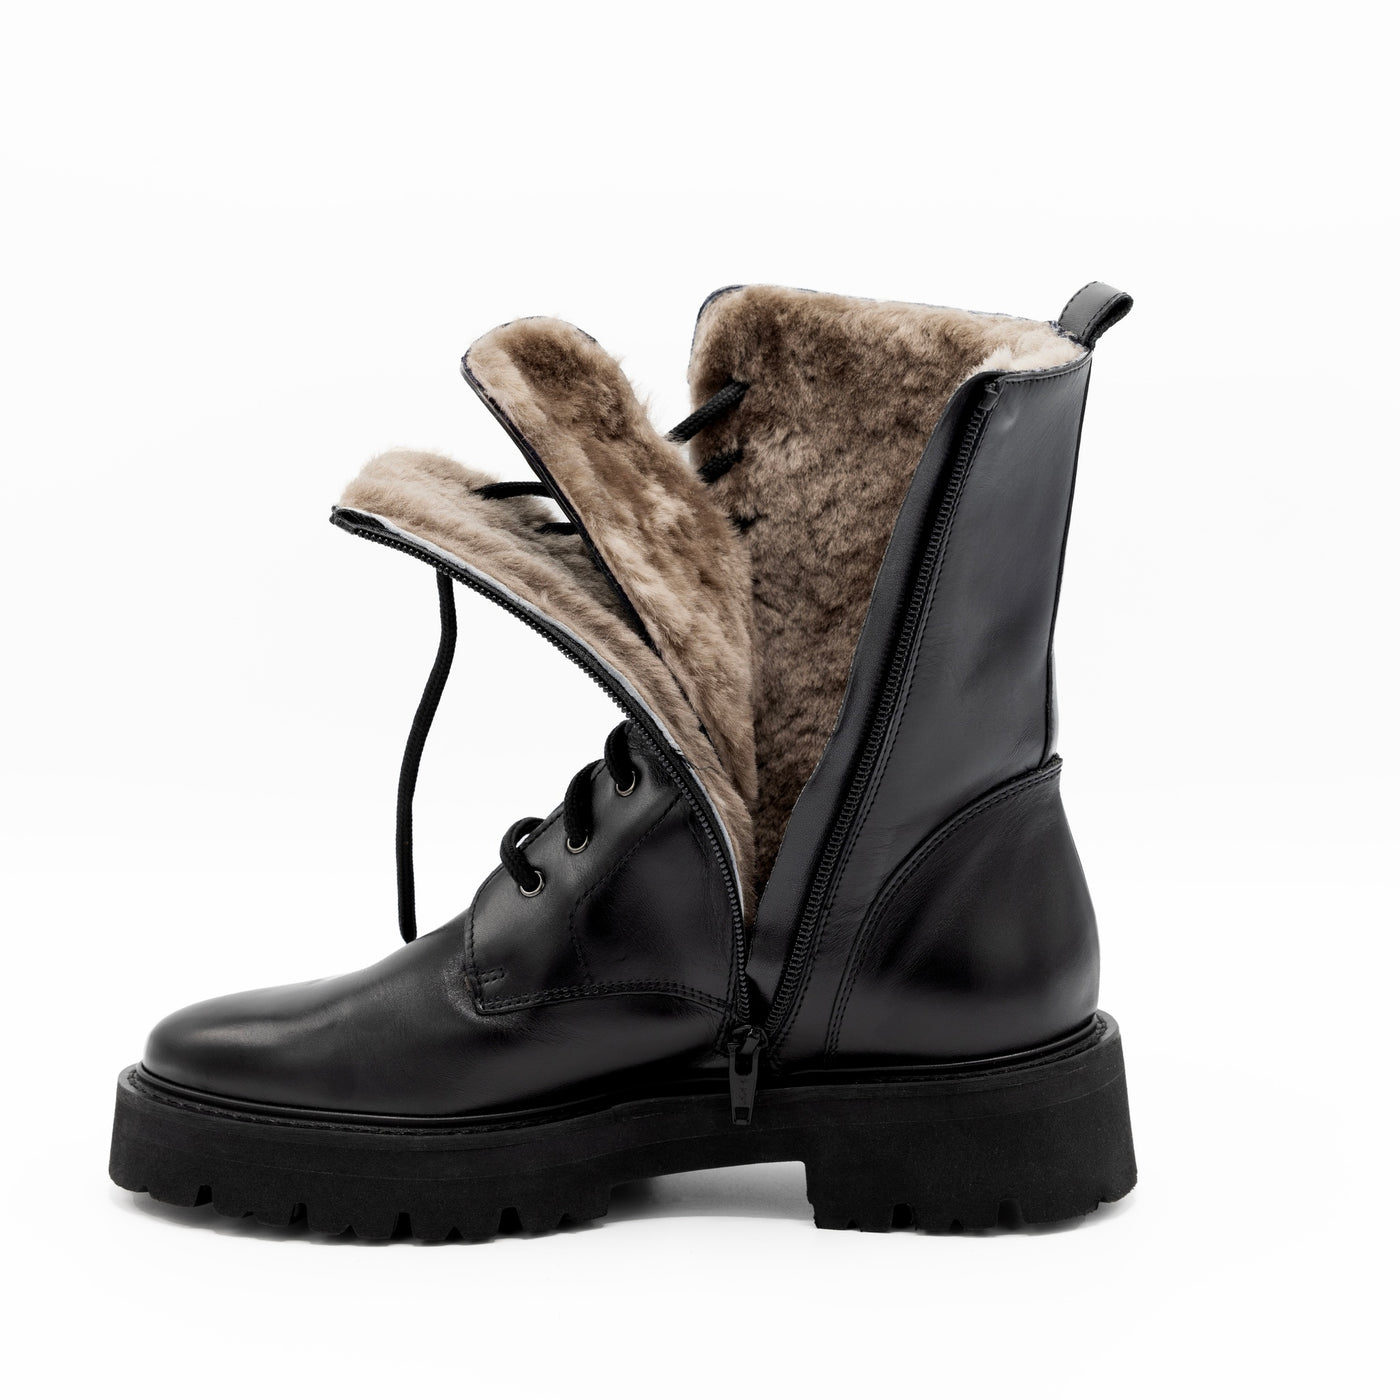 Black shearling lined combat boots